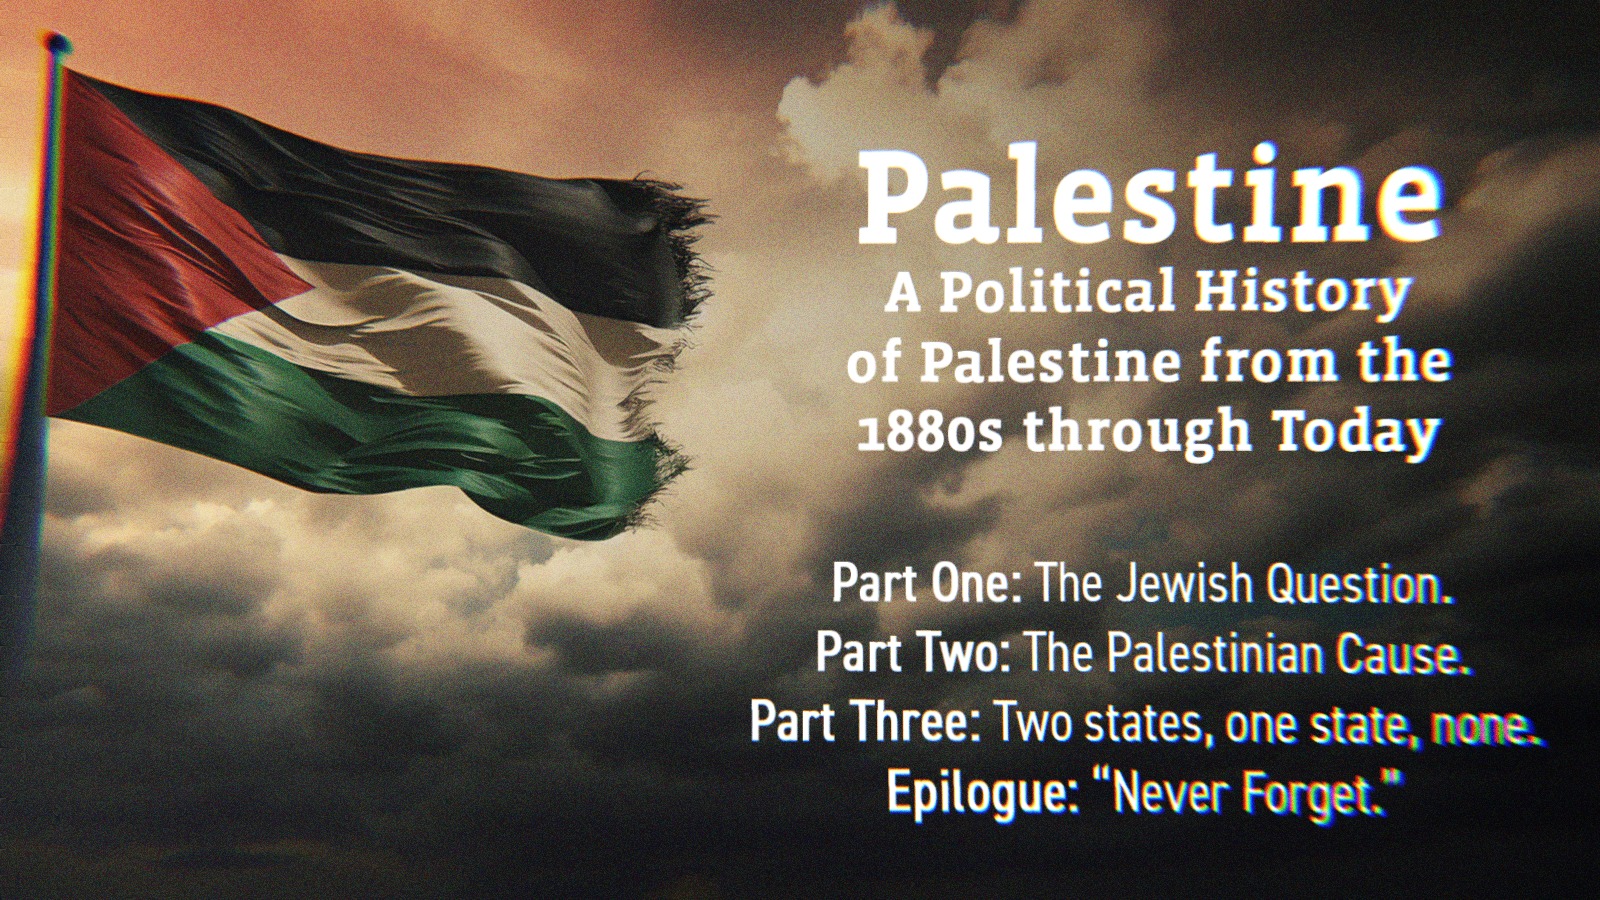 A Palestinian flag alongside text that says Palestine, A Political History of Palestine from the 1800s through Today. Part One- The Jewish Question. Part Two- The Palestinian Cause. Part Three- Two states, one state, none. Epilogue- Never Forget.